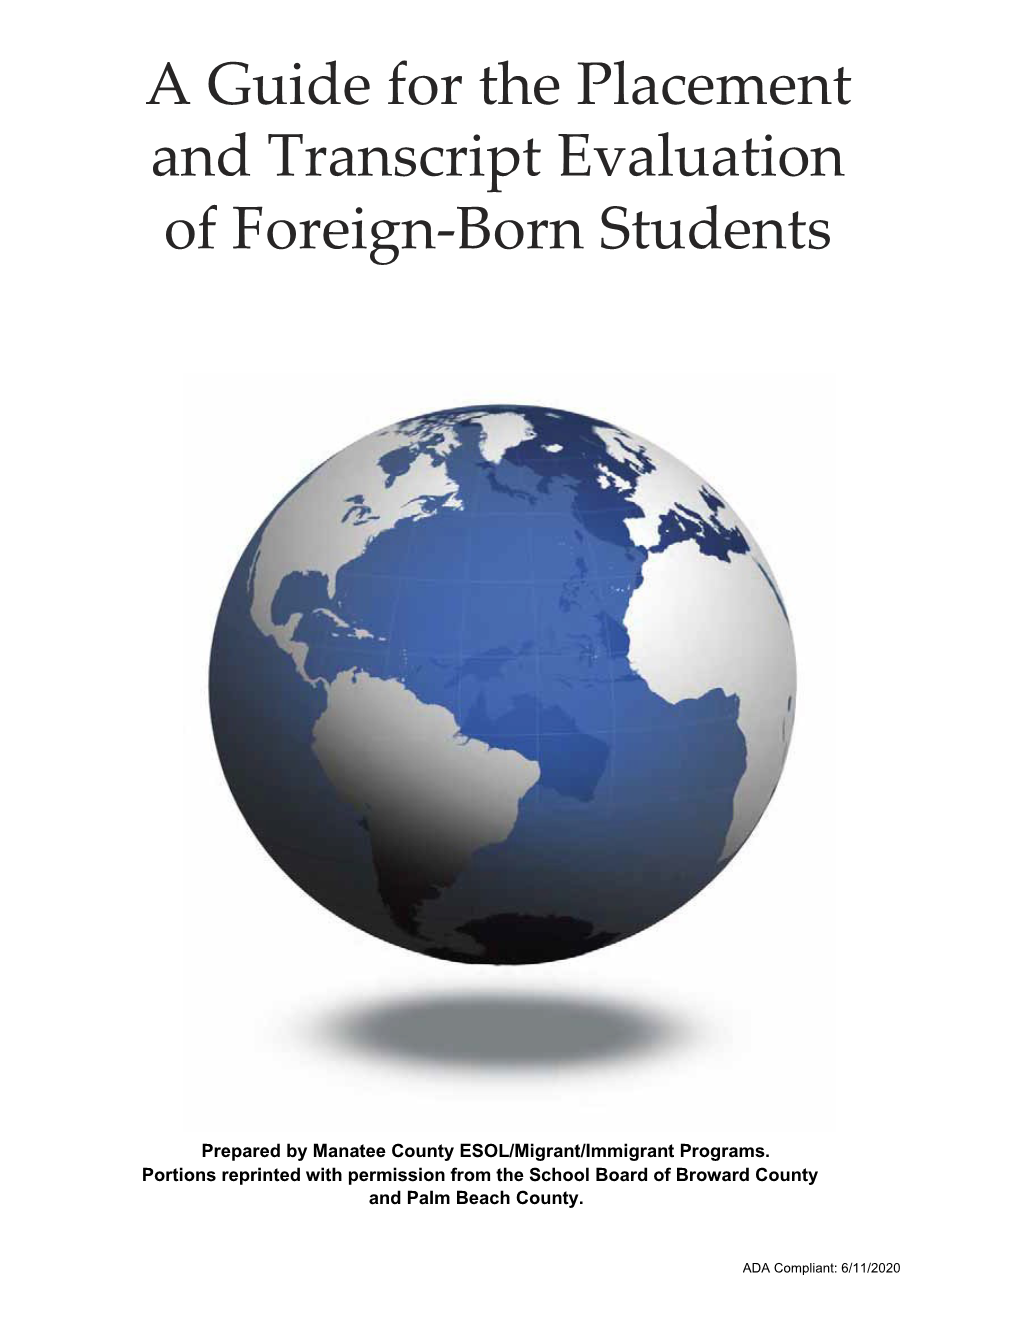 A Guide for the Placement and Transcript Evaluation of Foreign-Born Students